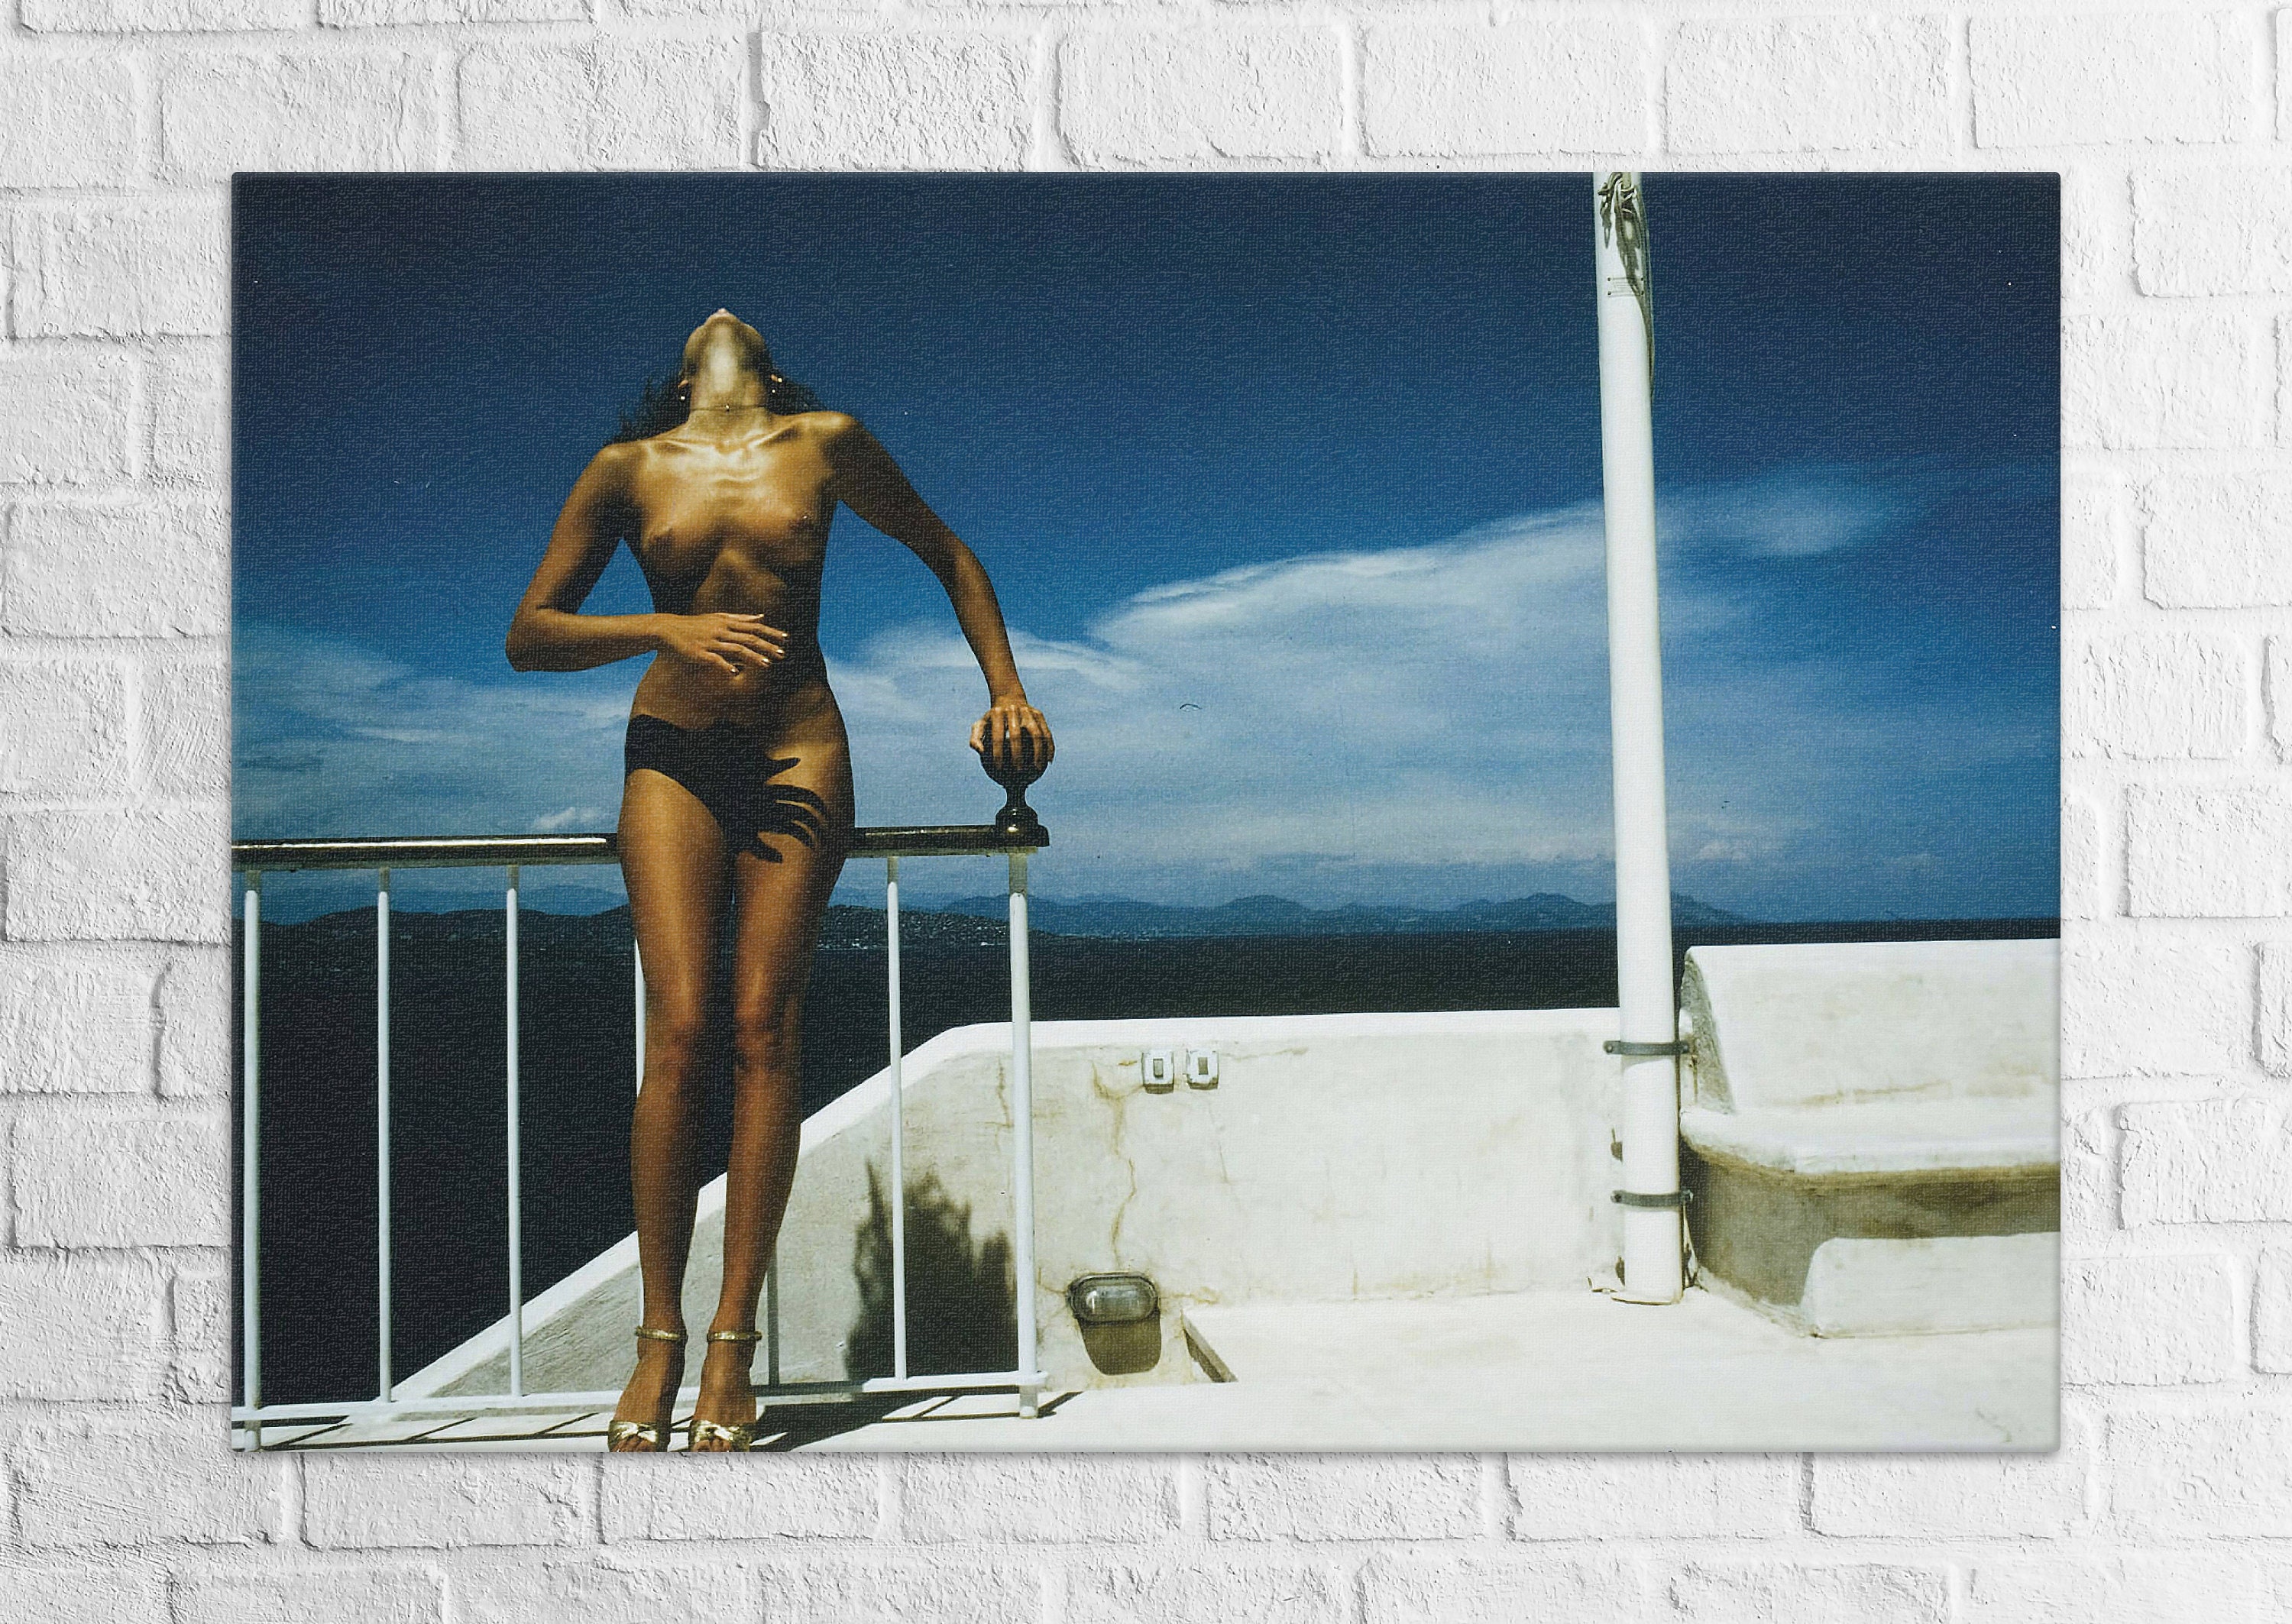 Canva of Nude for Pentax Nude for Pentax by Helmut Newton pic